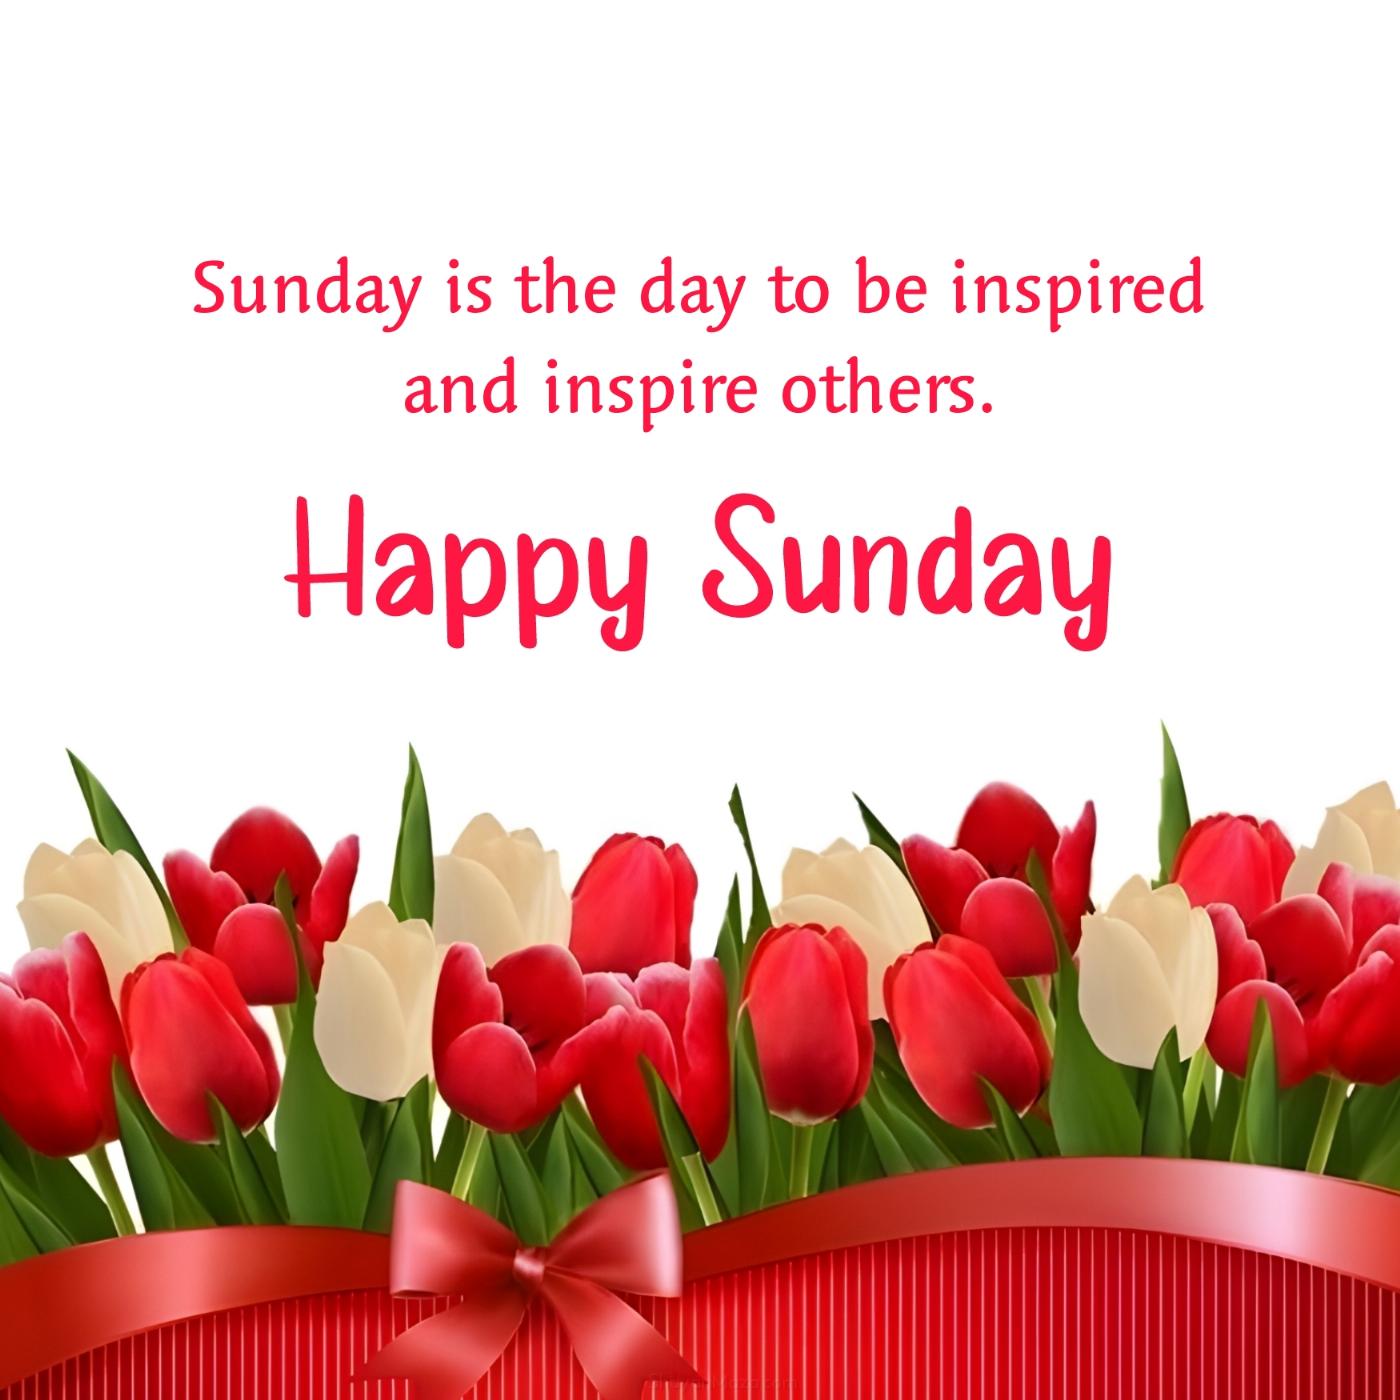 Sunday is the day to be inspired and inspire others